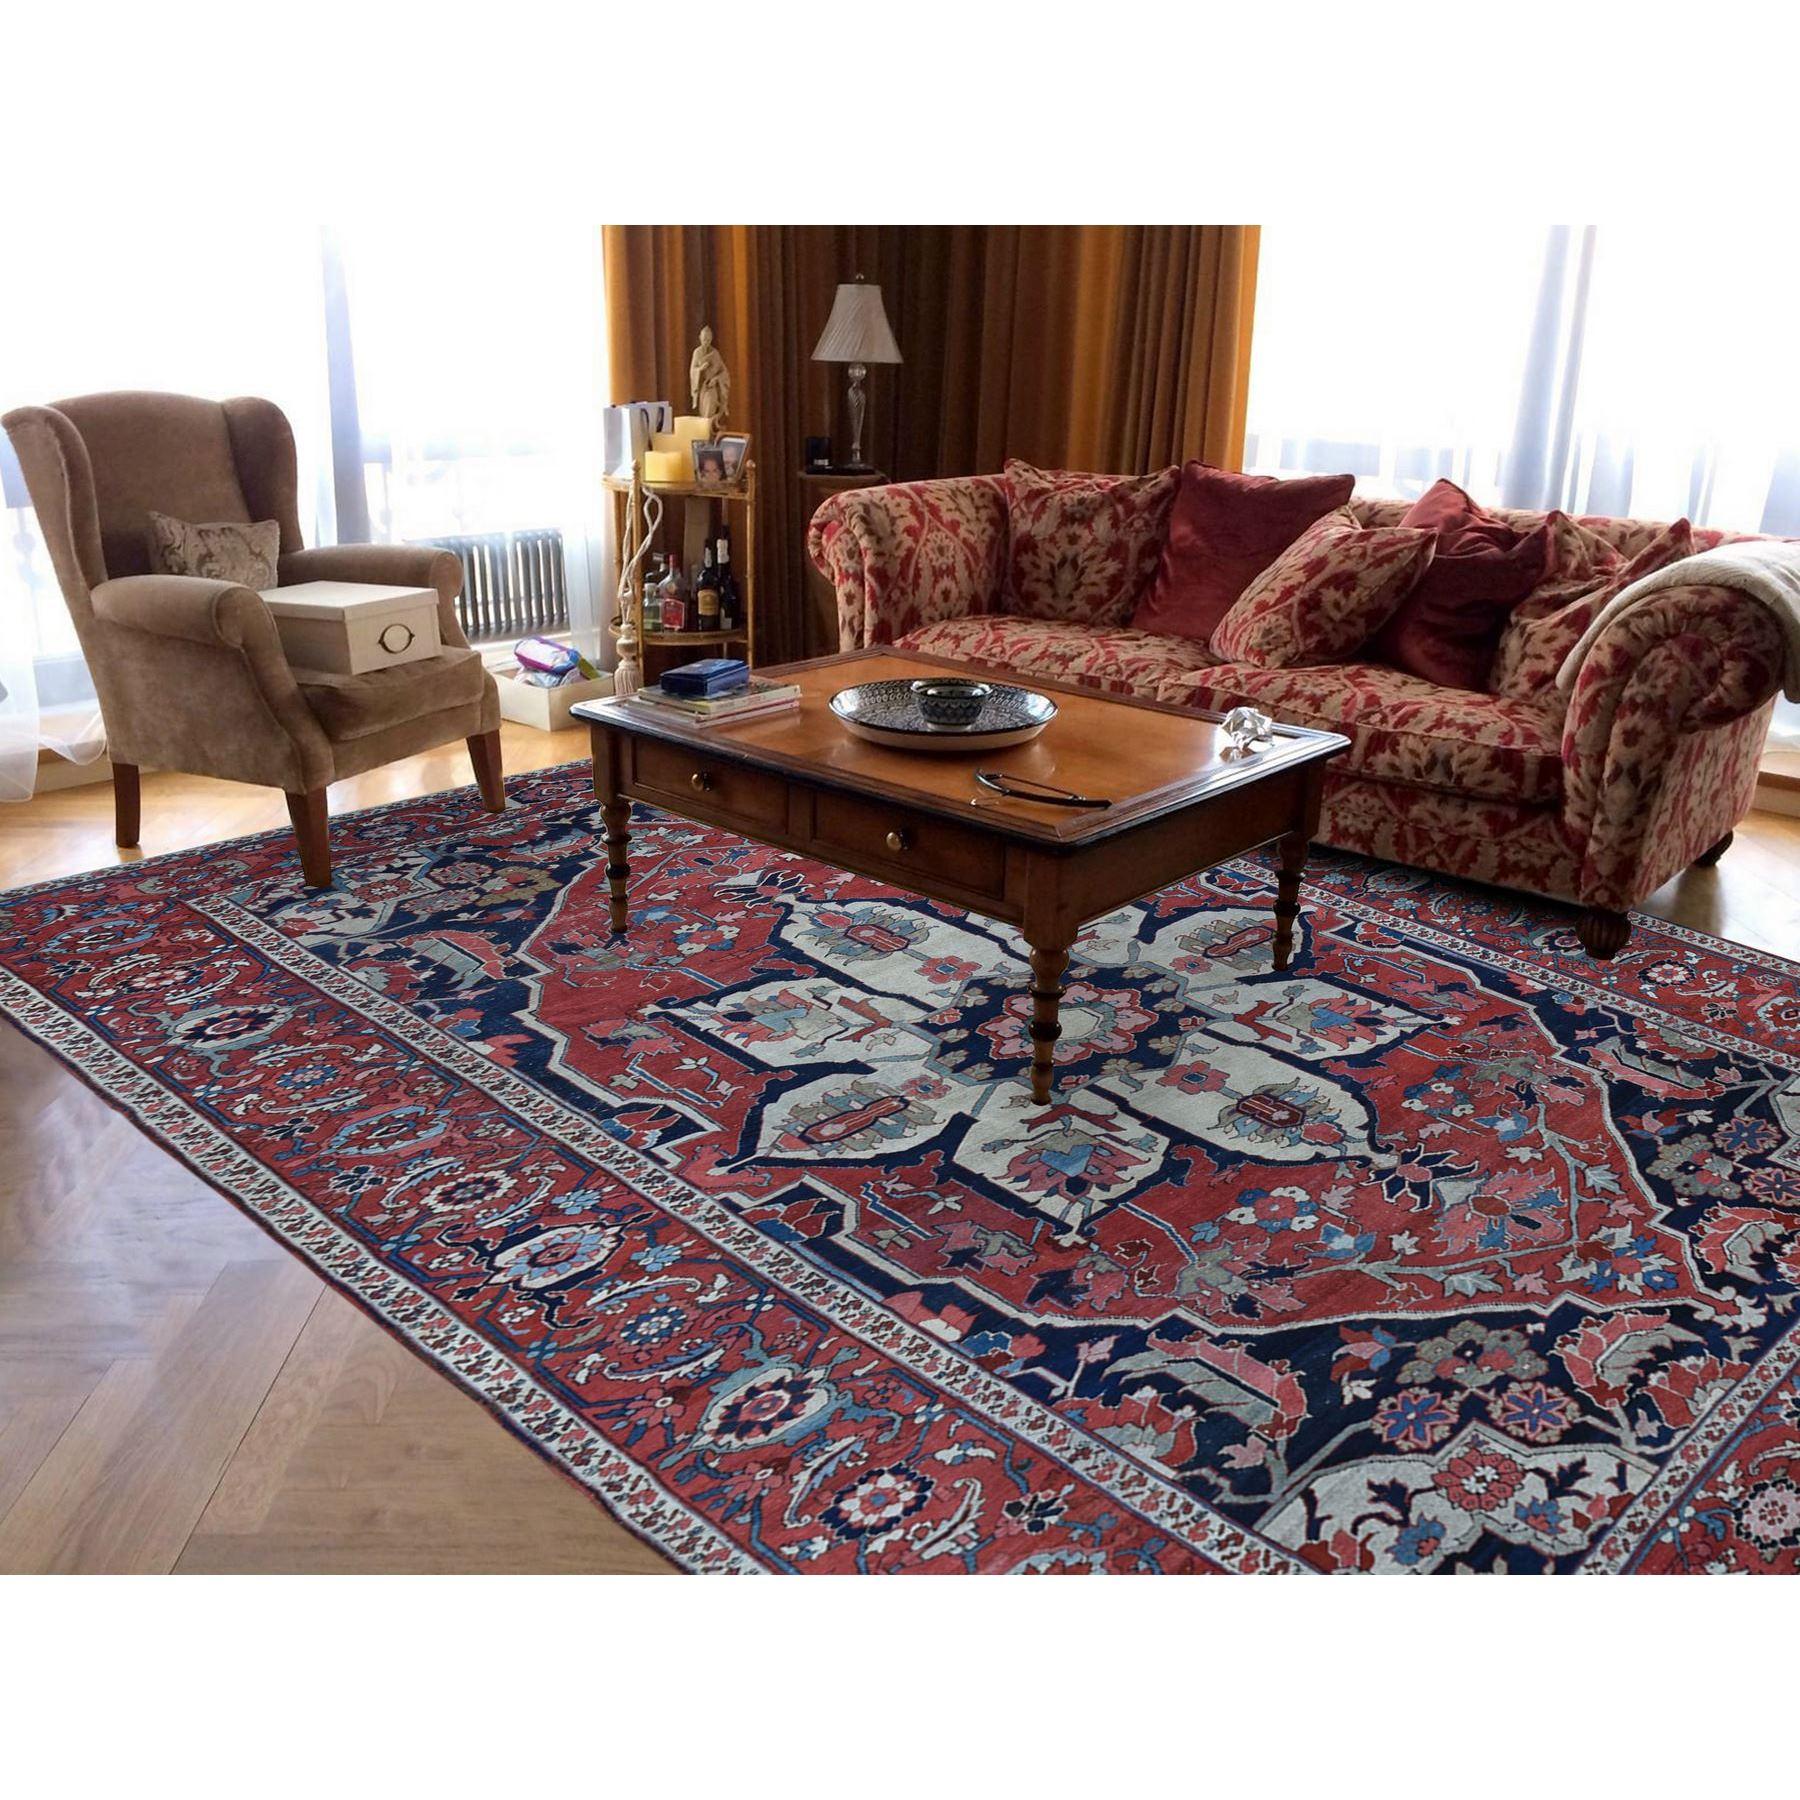 This fabulous Hand-Knotted carpet has been created and designed for extra strength and durability. This rug has been handcrafted for weeks in the traditional method that is used to make
Exact Rug Size in Feet and Inches : 9'1